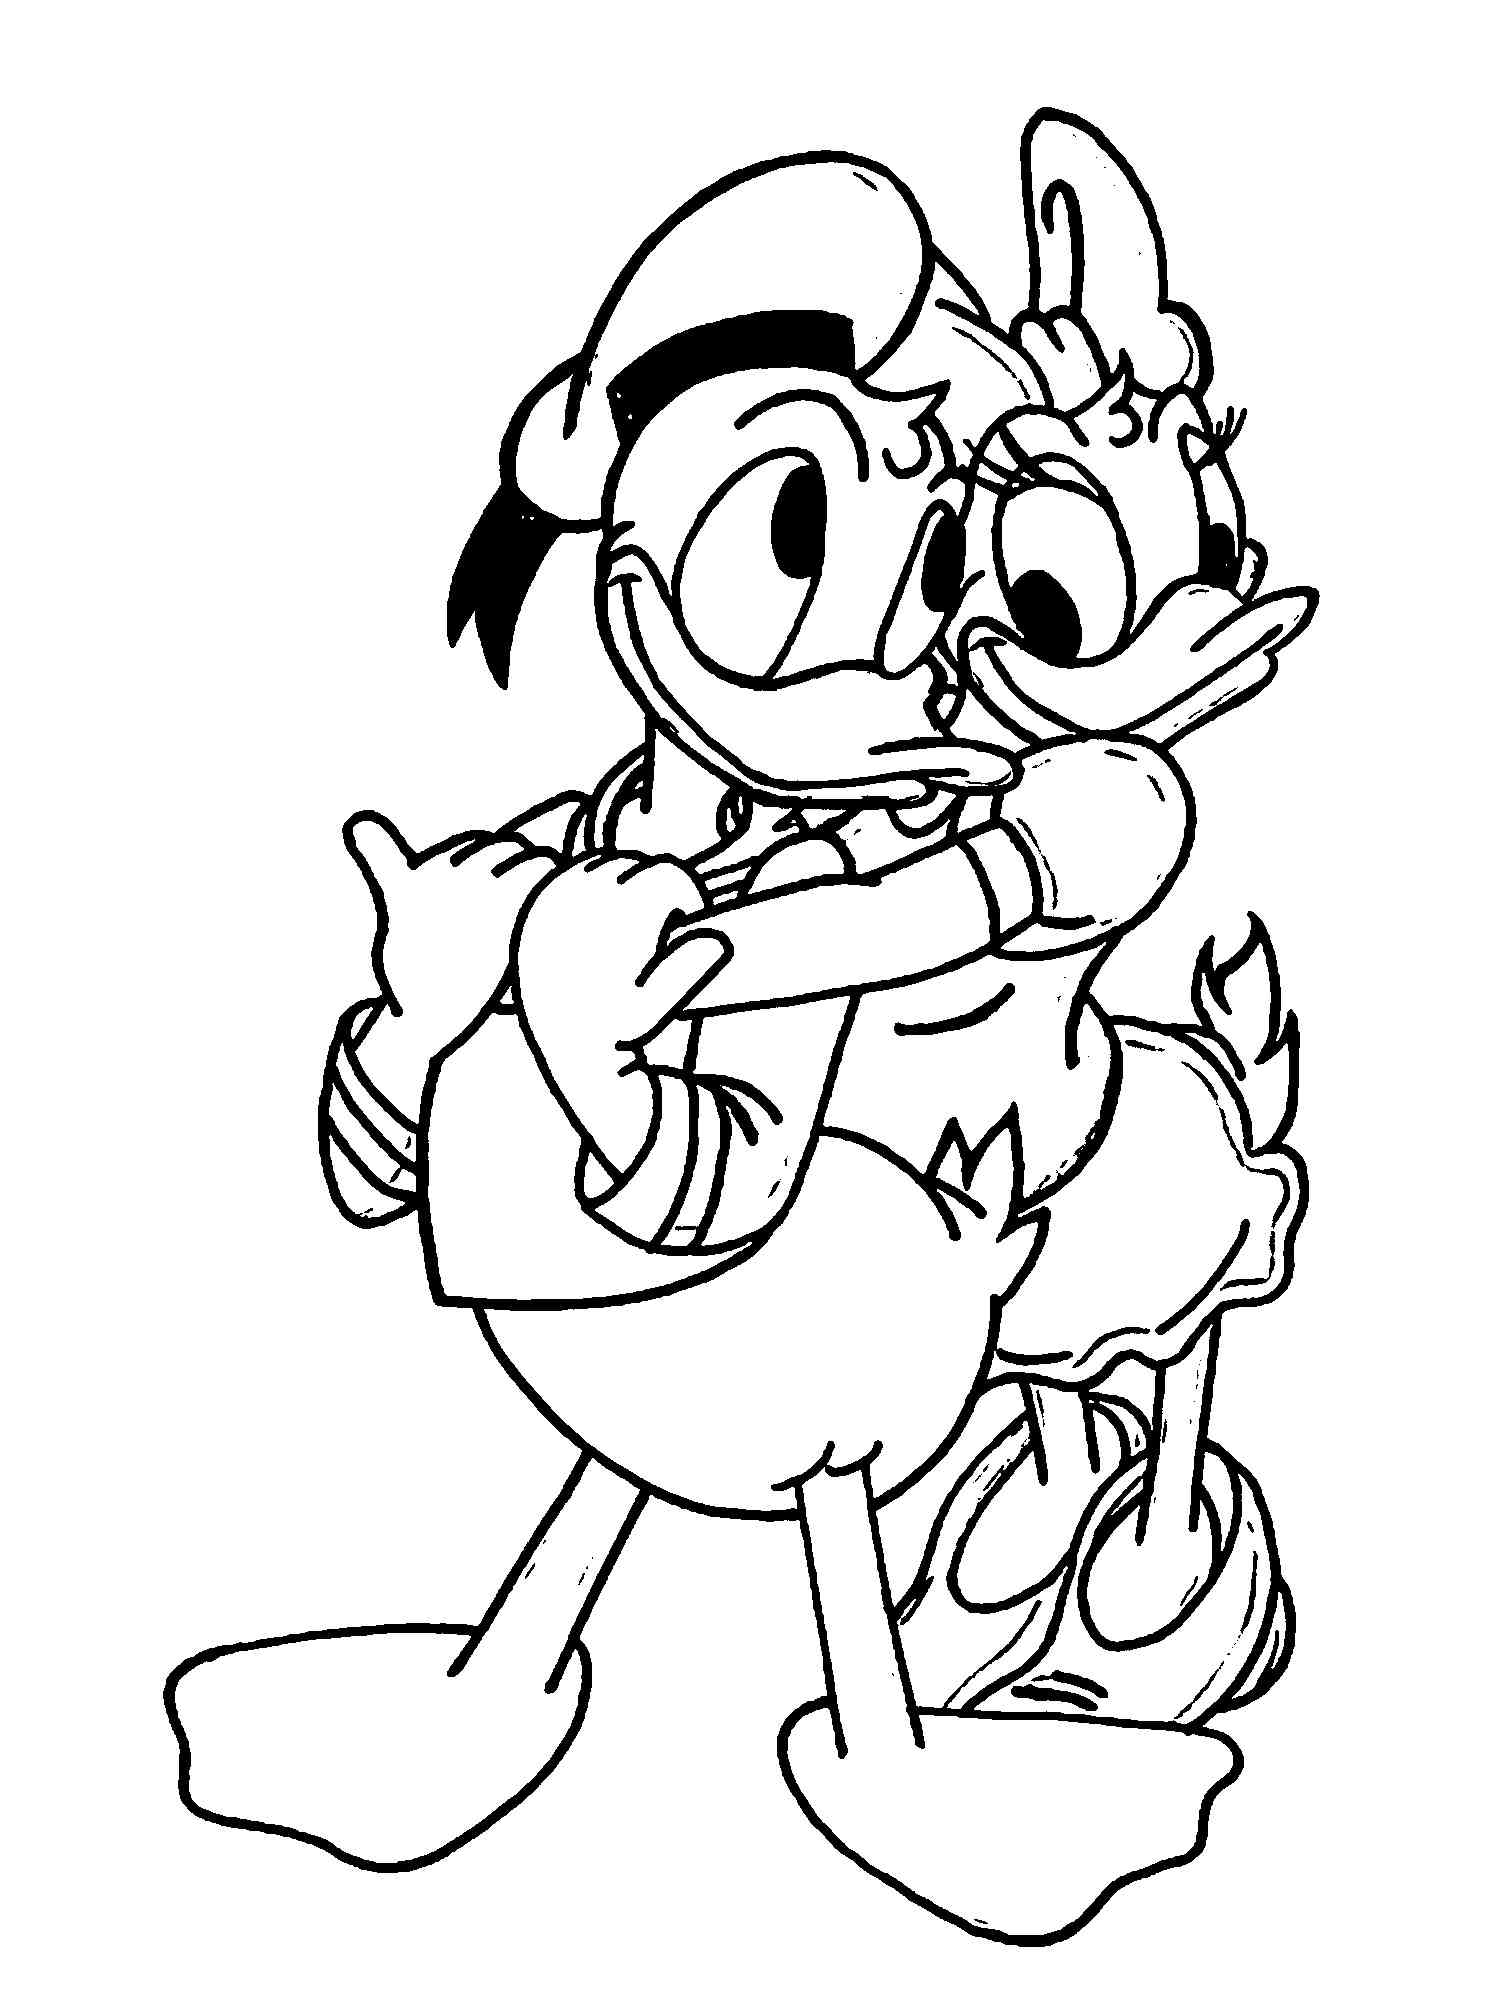 Donald Duck 14 coloring page